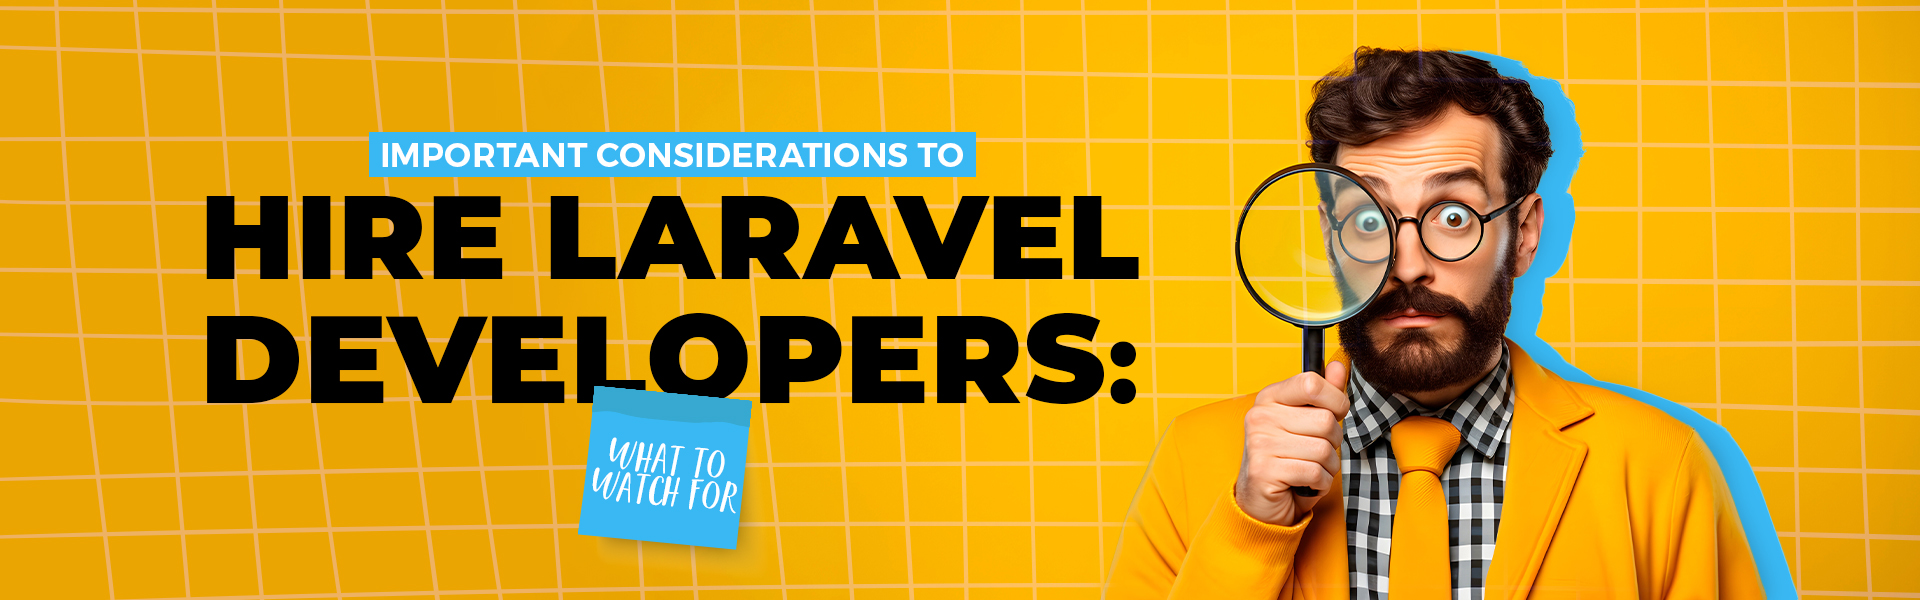 CC_Important Considerations to Hire Laravel Developers What to Watch For_main banner